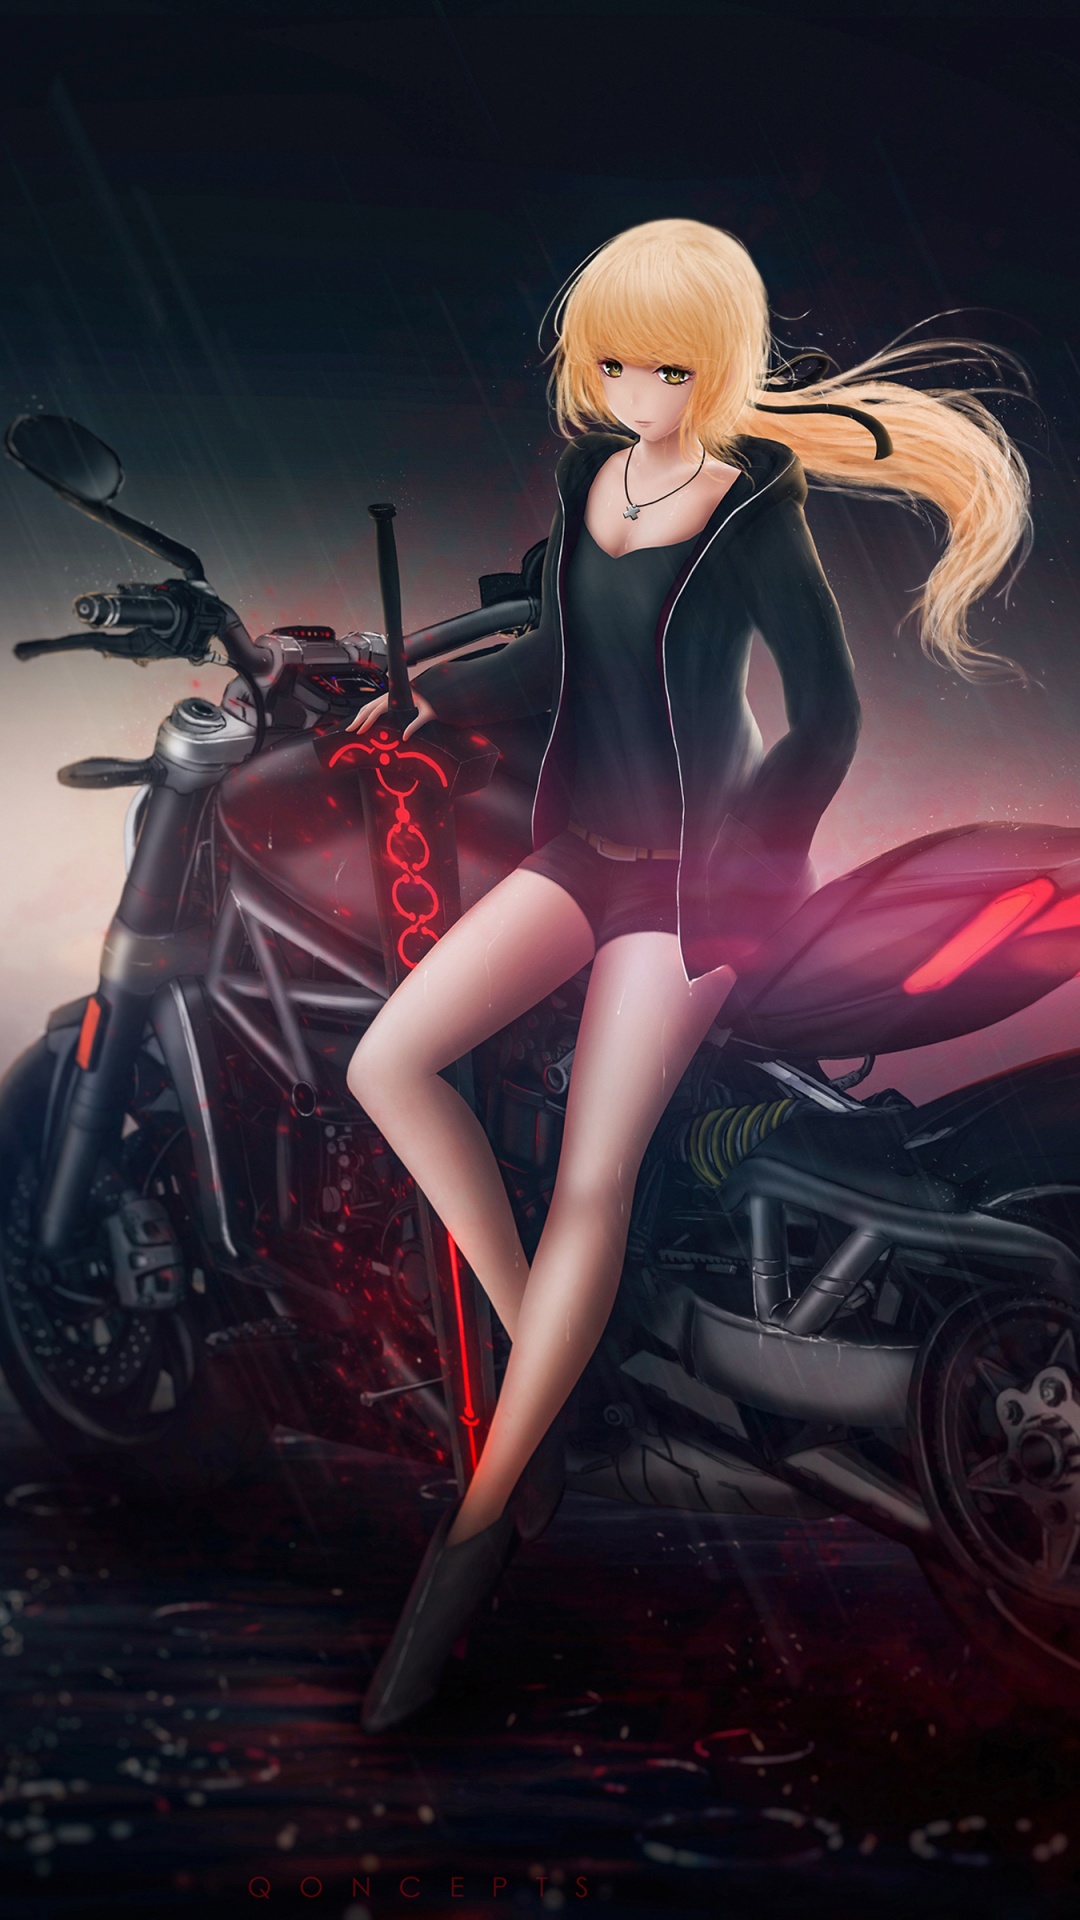 Woman in Black and Red Sports Bike Anime Character. Wallpaper in 1080x1920 Resolution